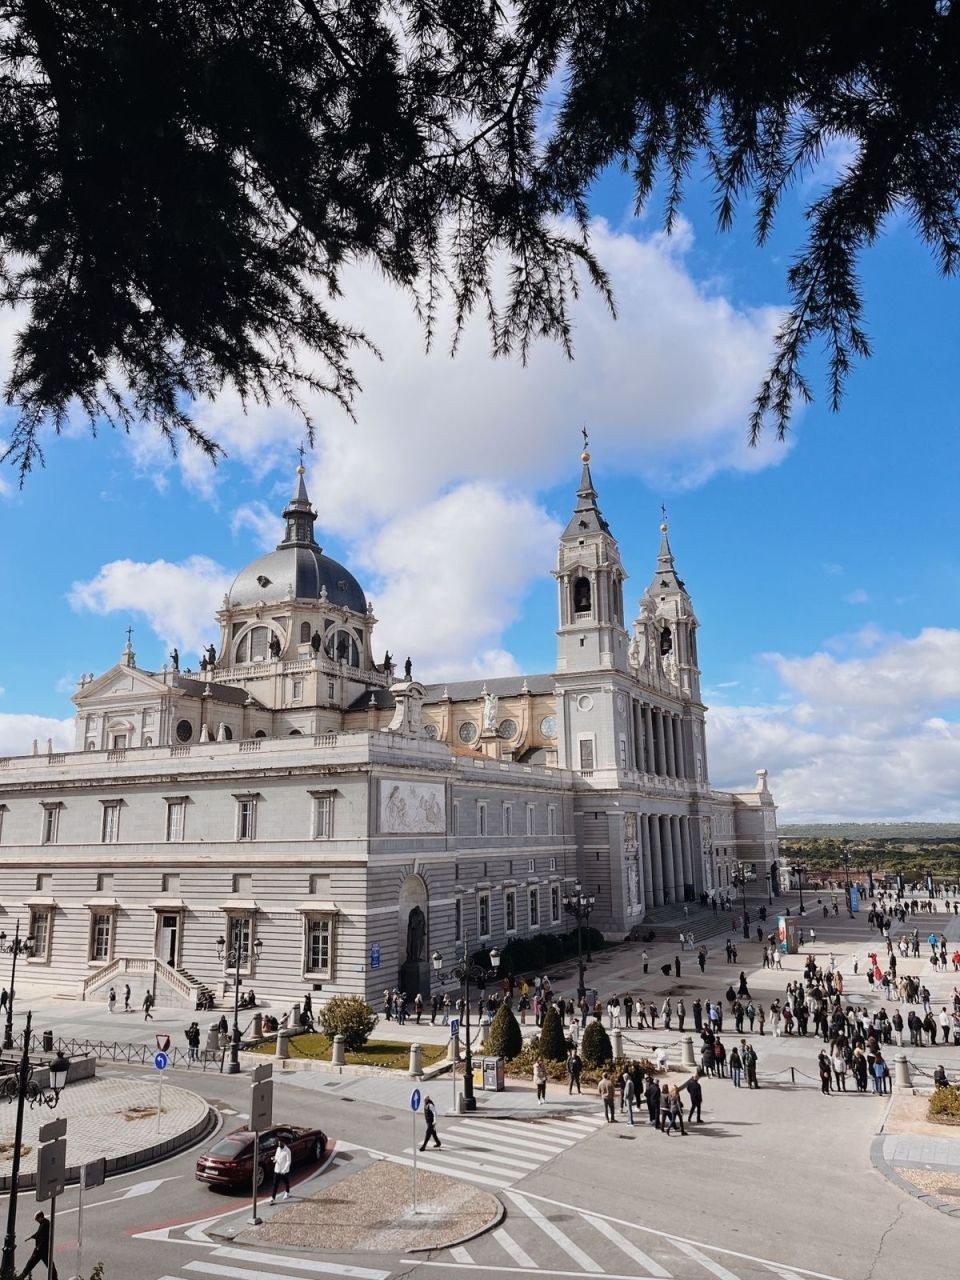 View of Almudena Cathedral in Madrid, Spain taken from up high with many visitors walking around